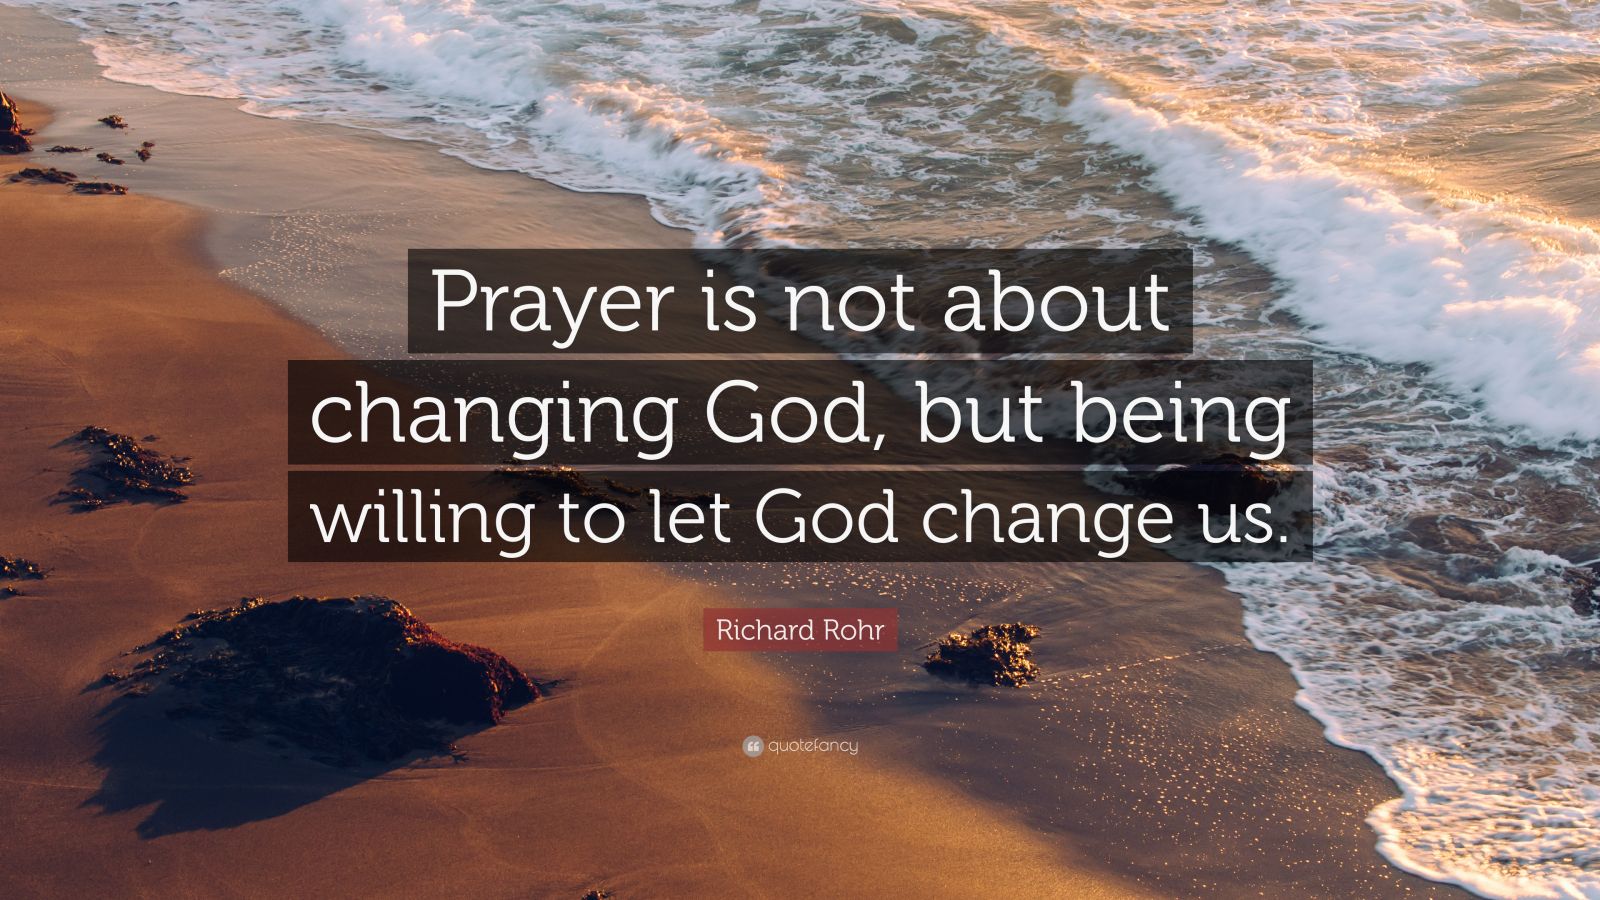 Richard Rohr Quote “Prayer is not about changing God, but being